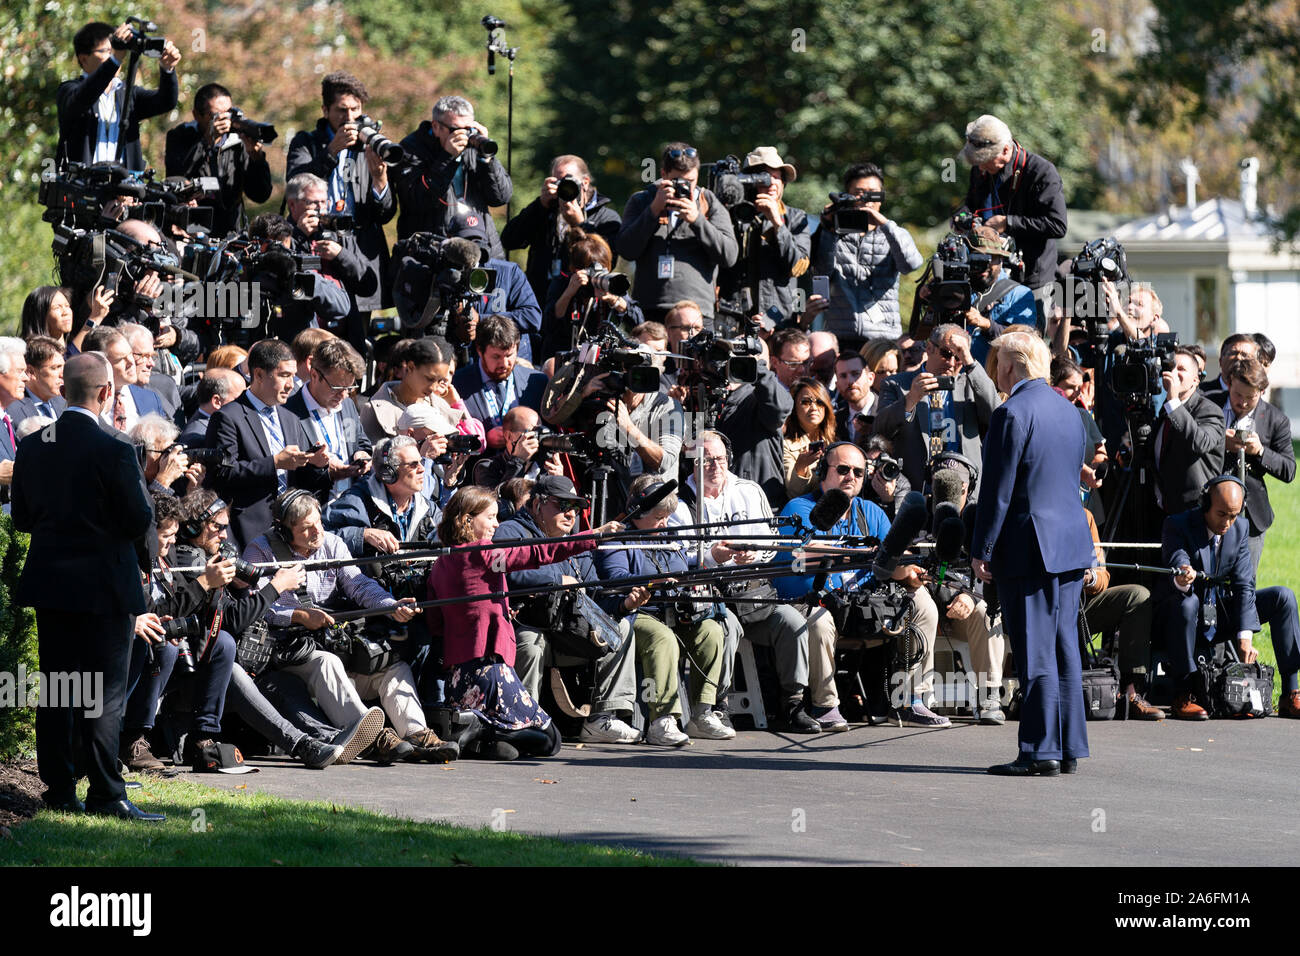 Pittsburgh, United States Of America. 23rd Oct, 2019. USA. Oct. 25, 2019. President Donald J. Trump talks to members of the press on the South Lawn driveway of the White House Wednesday, Oct. 23, 2019, prior to boarding Marine One to Pittsburgh. People: President Donald J. Trump Credit: Storms Media Group/Alamy Live News Credit: Storms Media Group/Alamy Live News Stock Photo